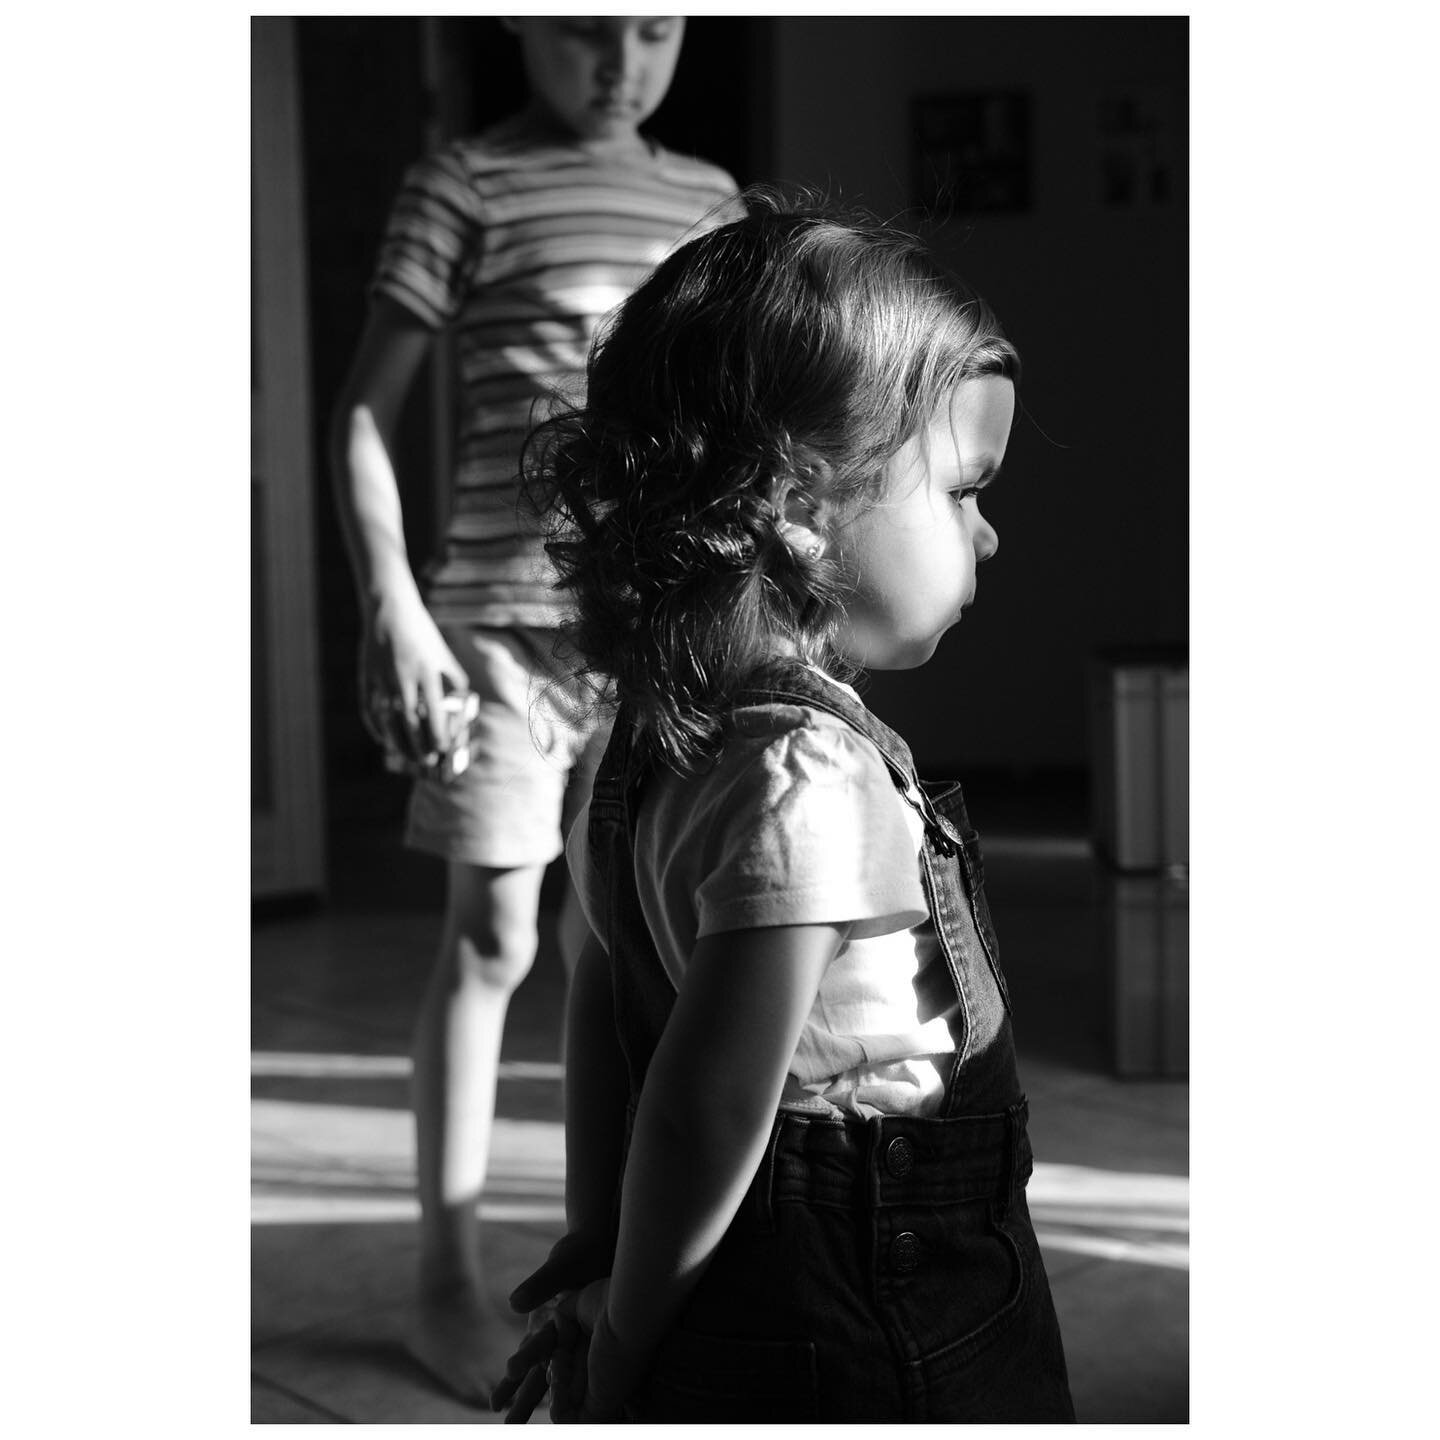 Our little old lady!
⠀⠀
Our 2 year old likes to walk around with her hand tucked behind her back at times. She behaves like a sweet little old lady at times ❤️
&bull;
&bull;
&bull;
#xt3 #fuji35mmf2 #socialdocumentary  #candidphotographer  #candidphot